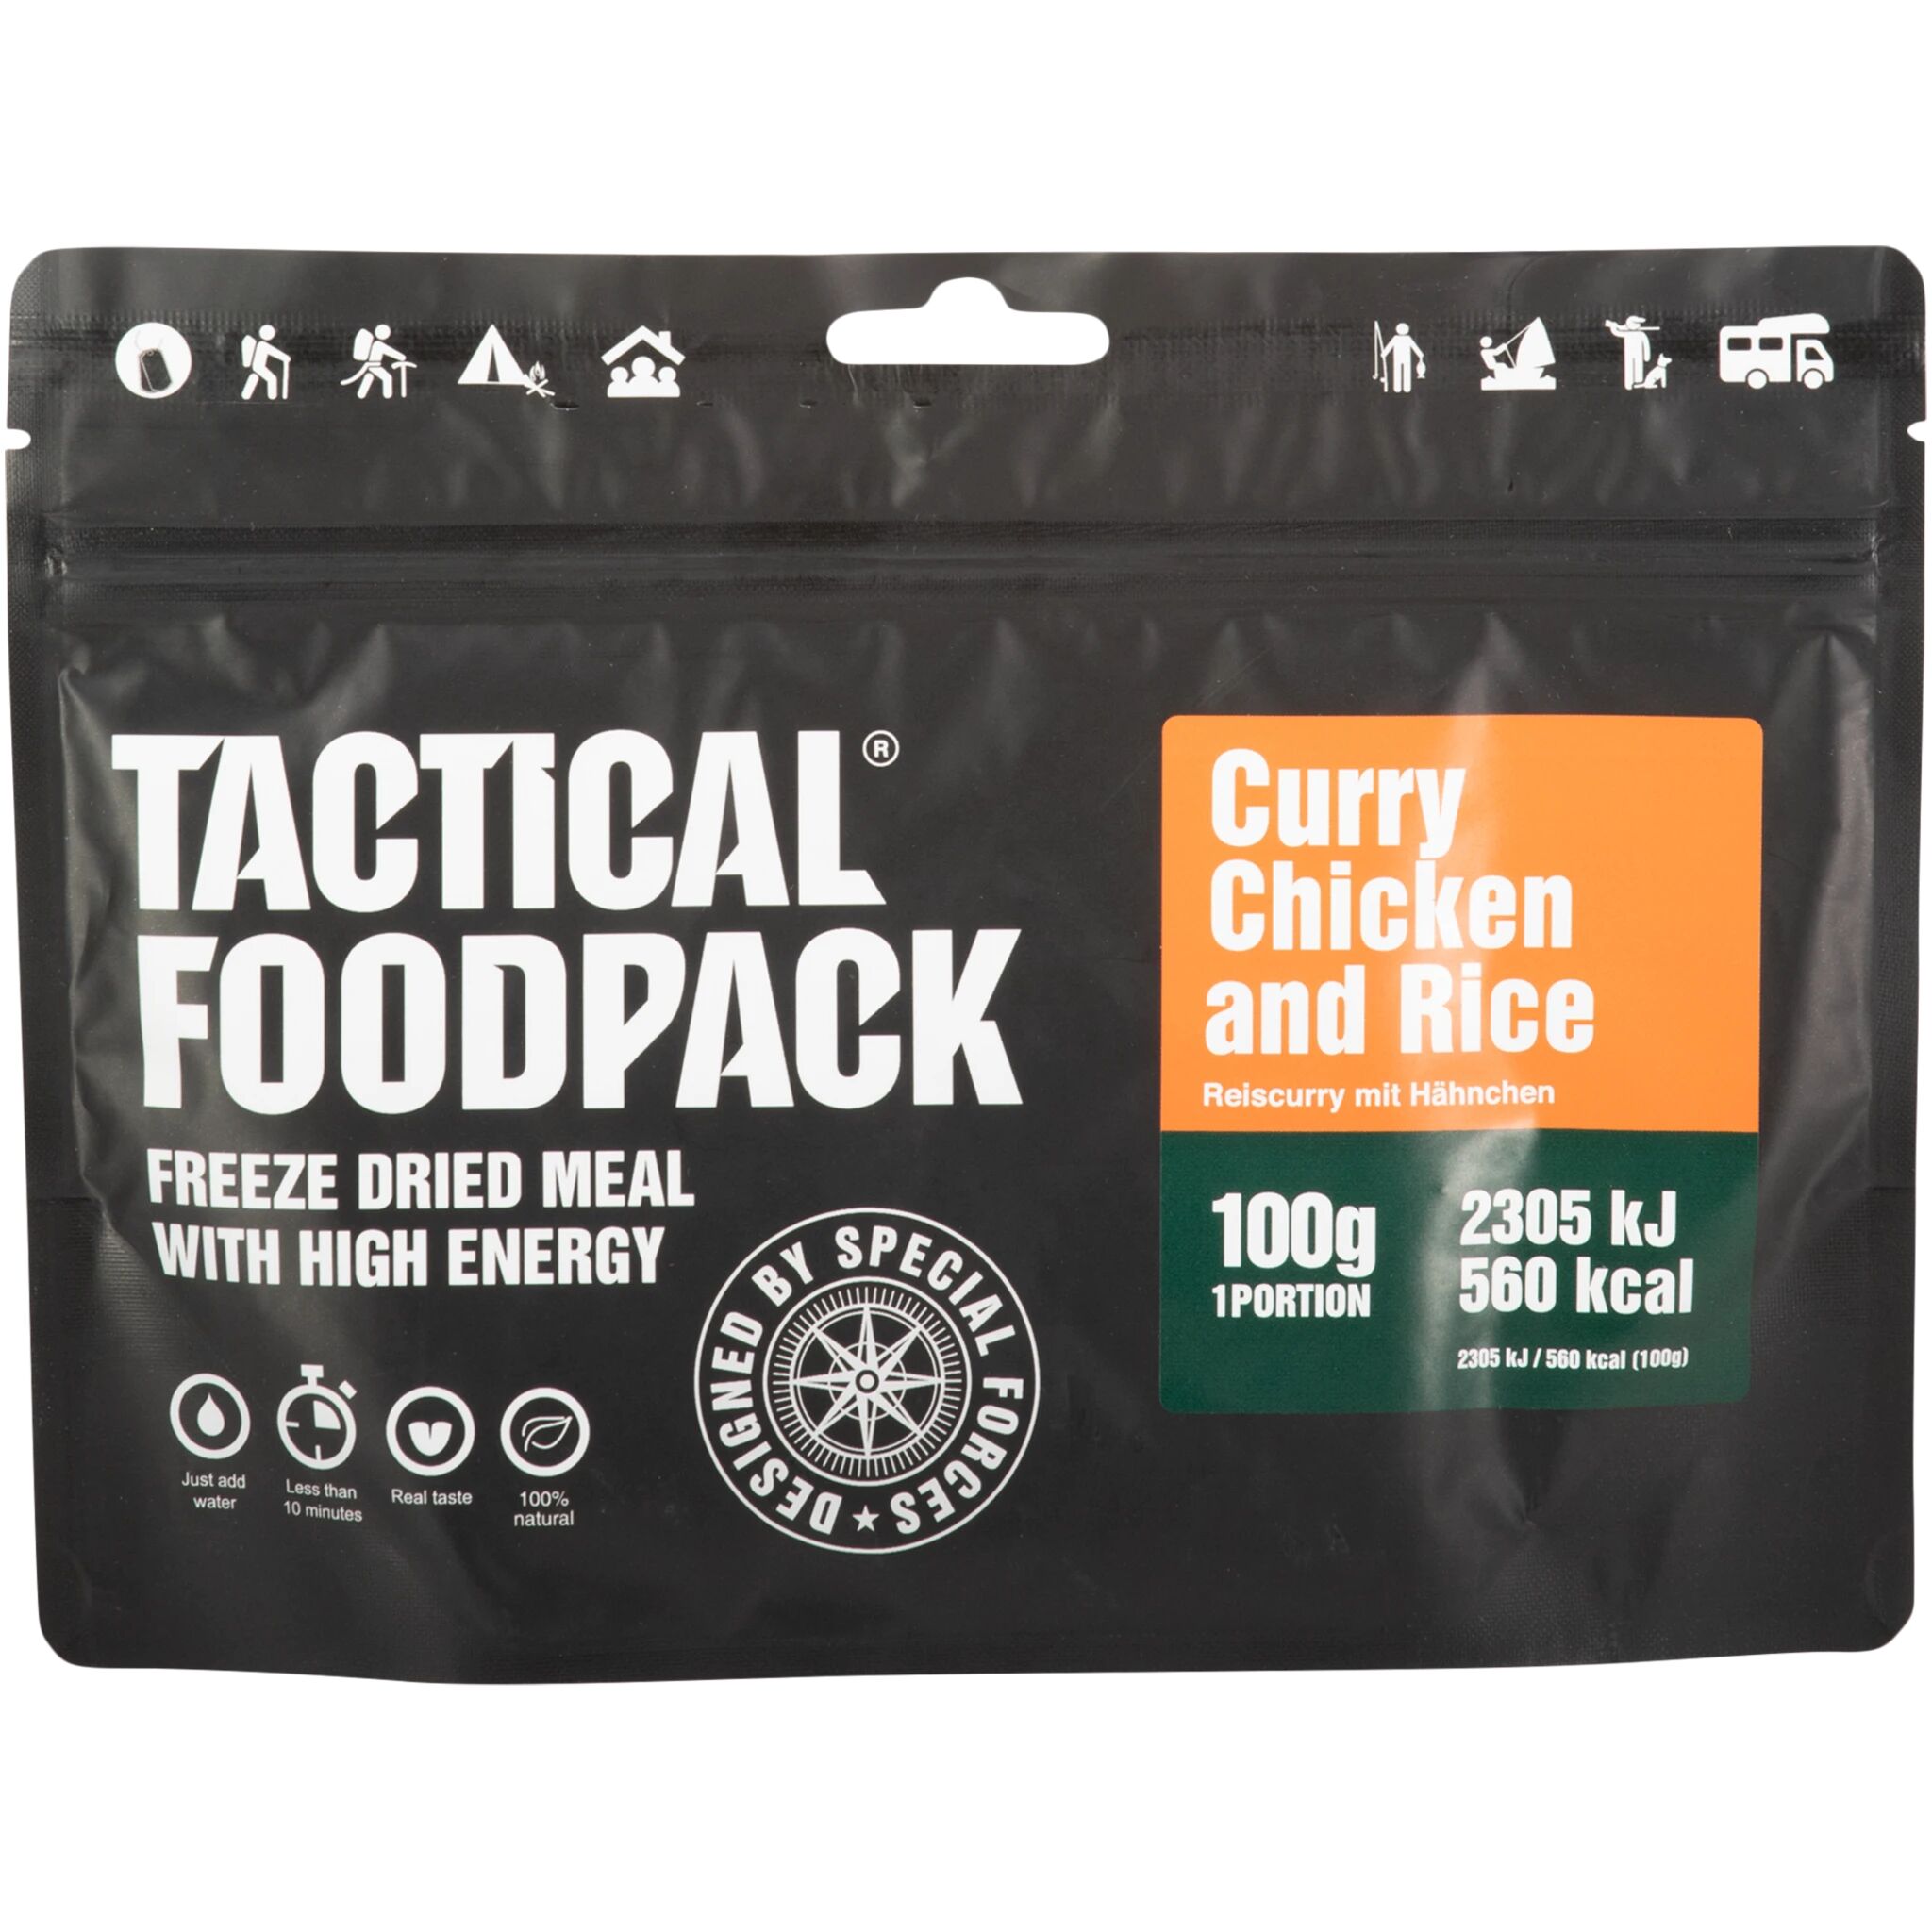 Tactical Foodpack Curry Chicken and Rice, turmat 100g STD